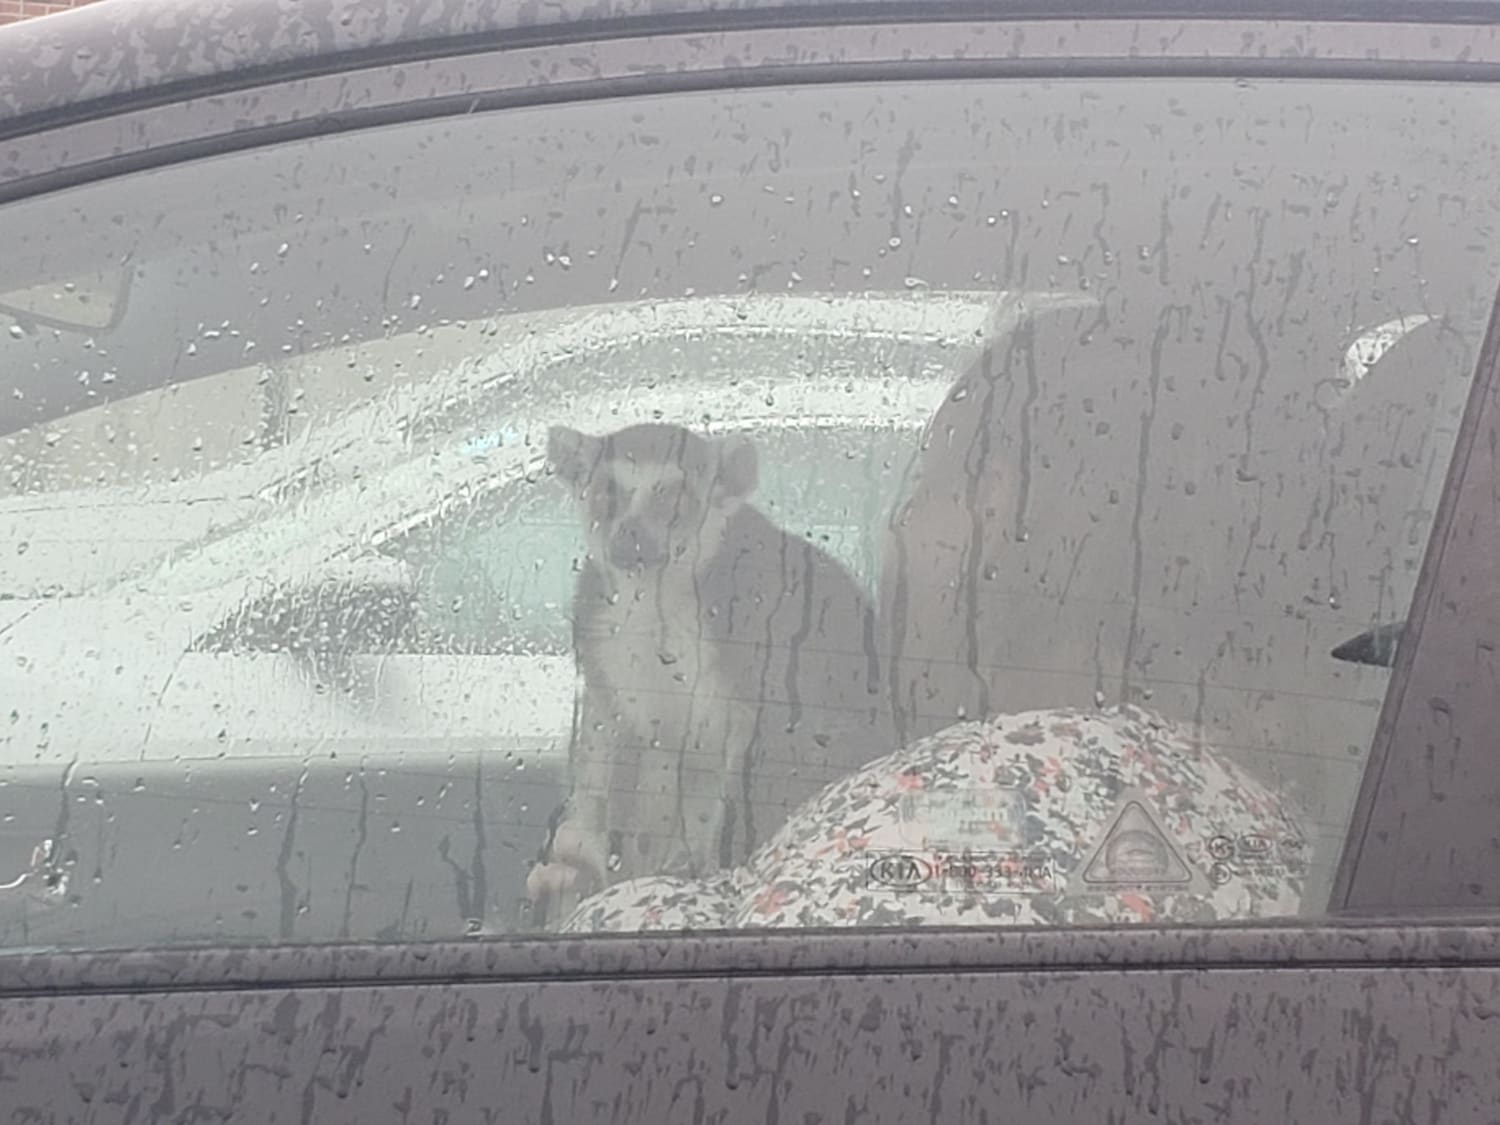 I was waiting for an appointment yesterday when I happened to look over and notice there was a lemur in the car parked next to me